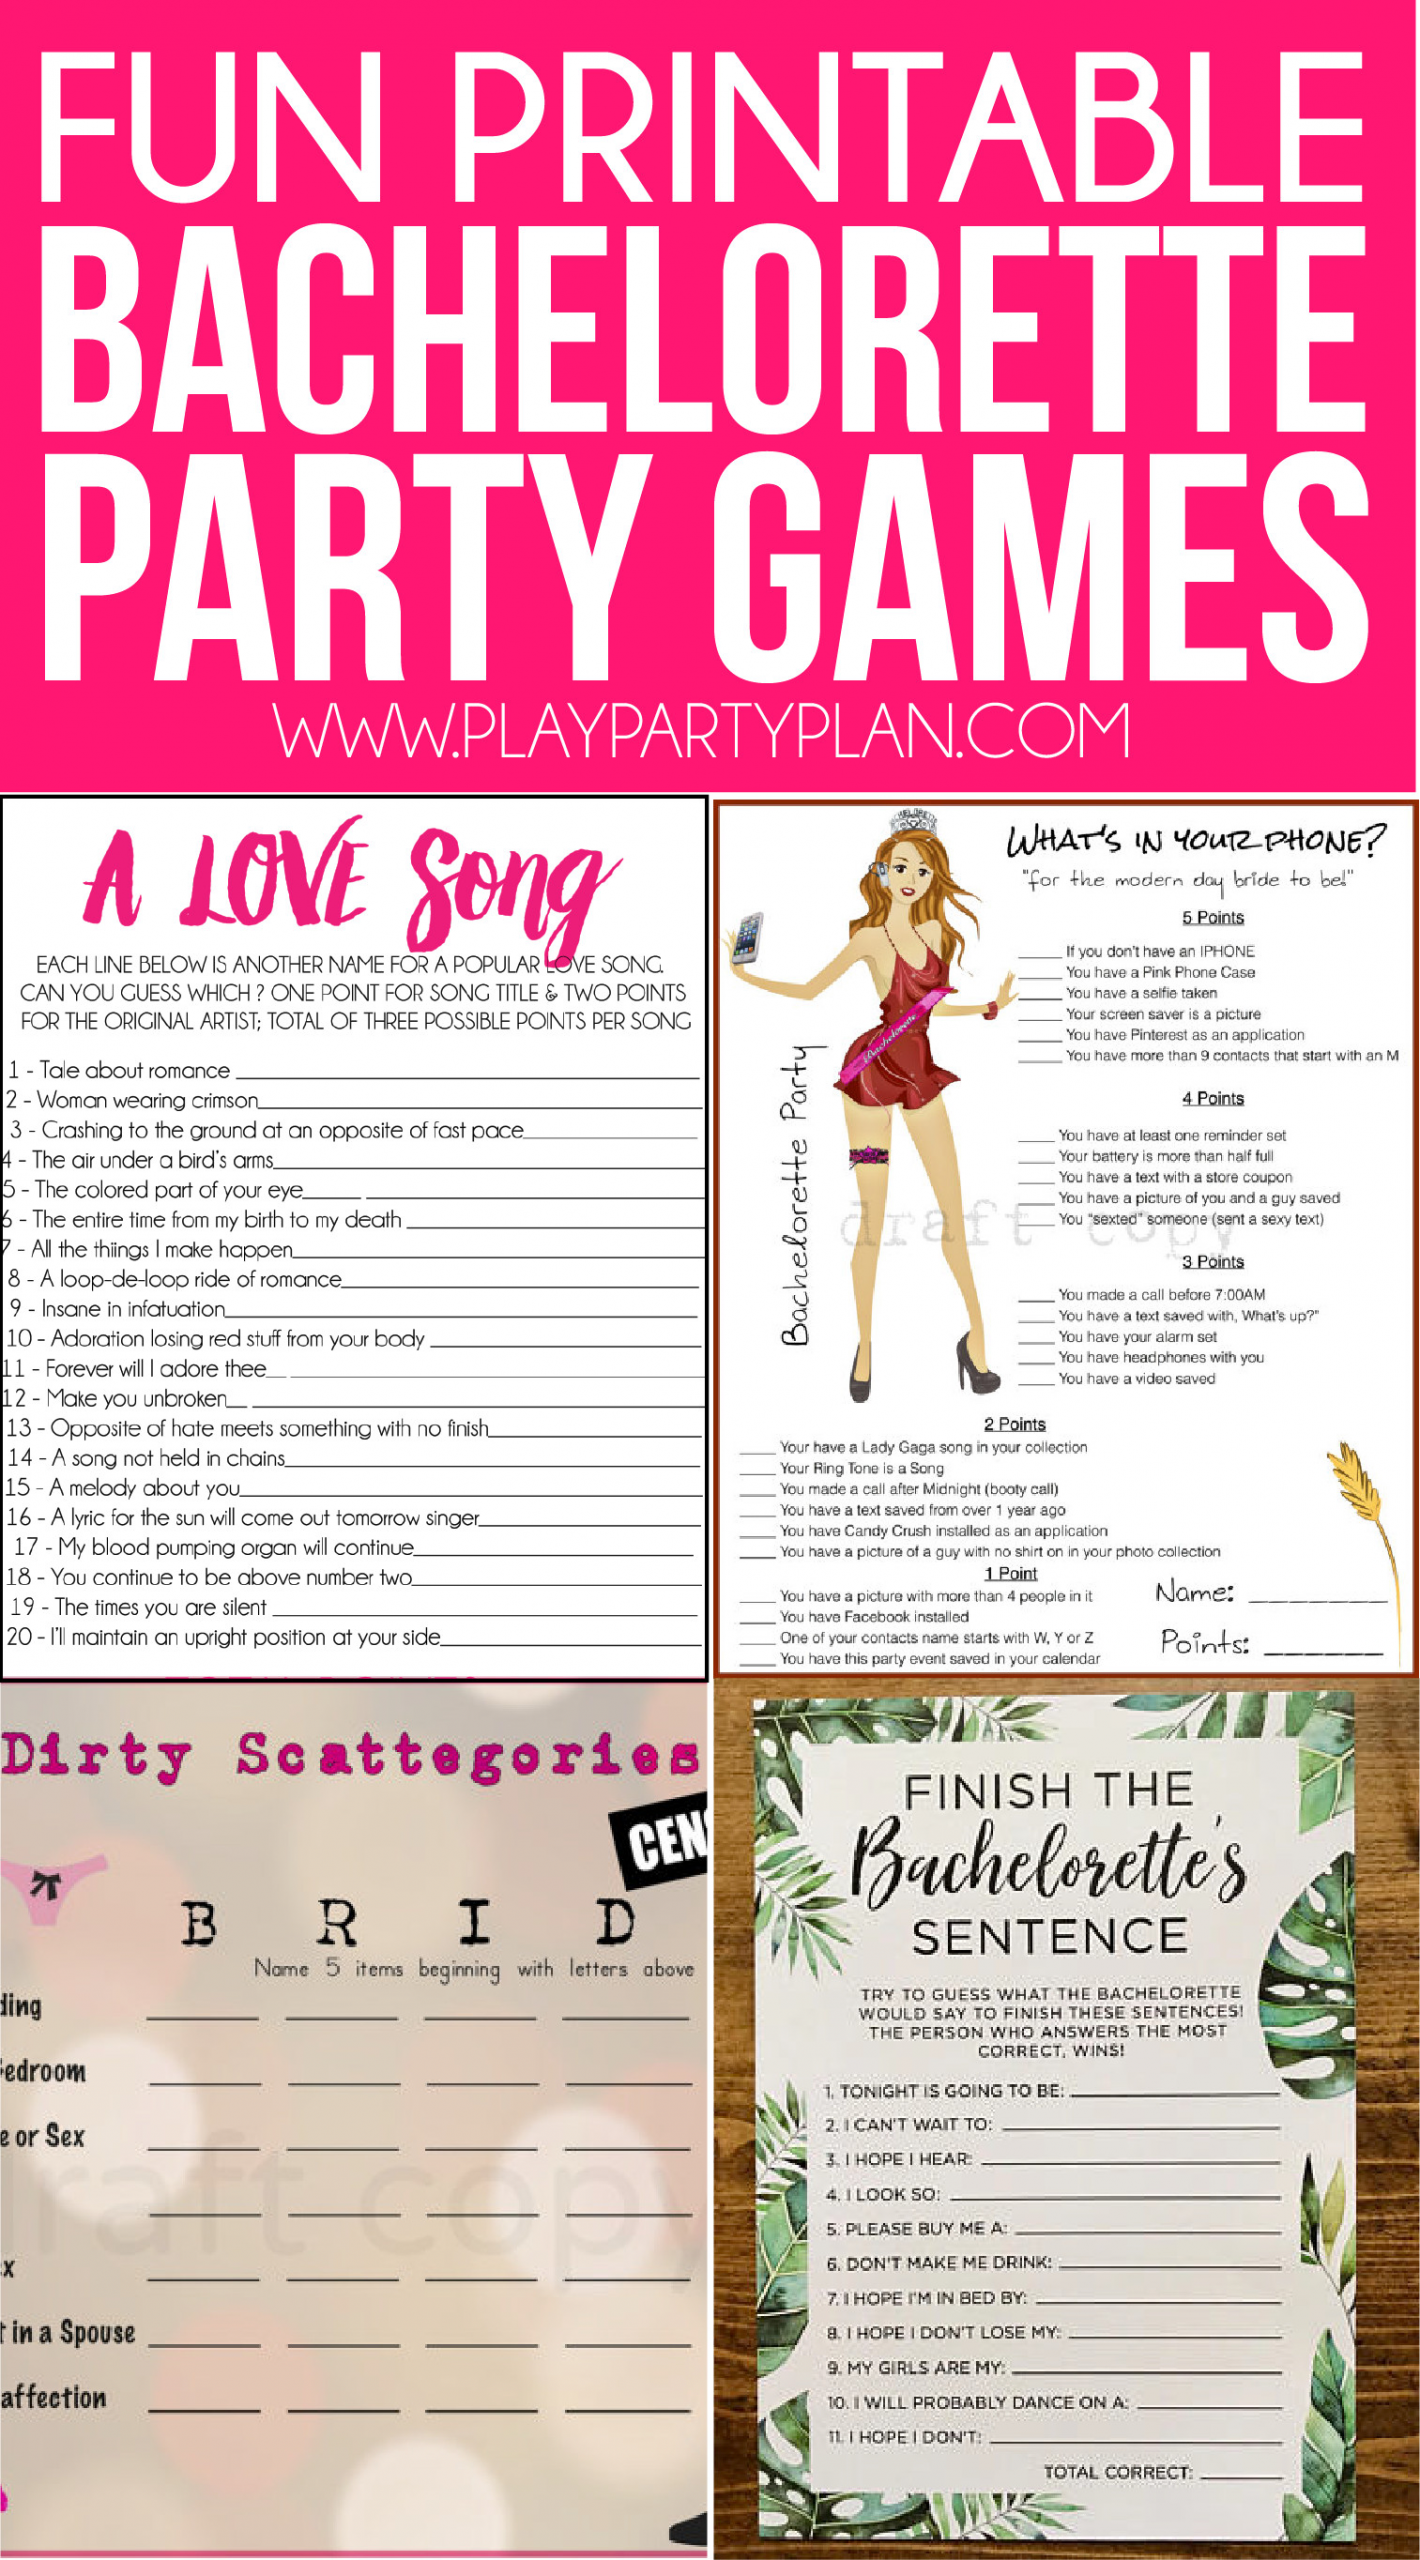 Bachelorette Party Game Ideas At Home
 20 Hilarious Bachelorette Party Games